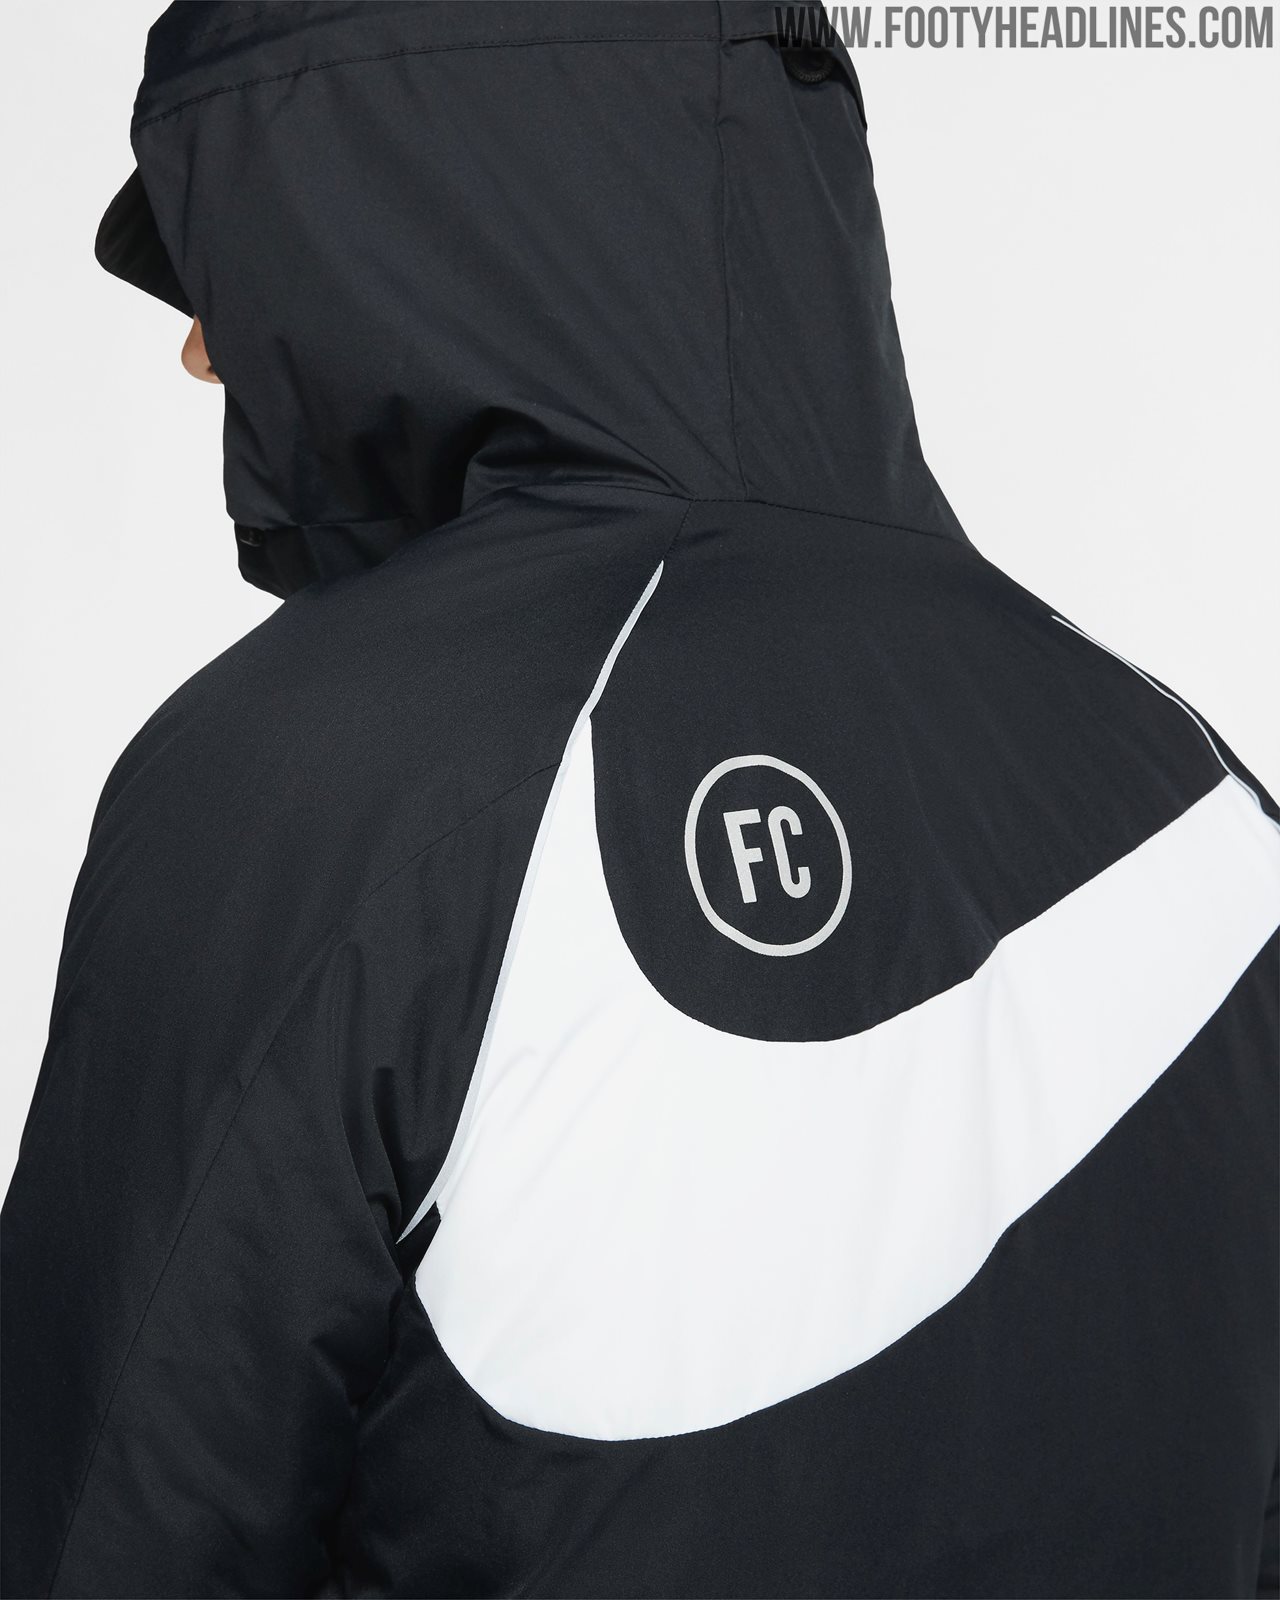 Stunning Nike Total 90 Inspired Nike FC Collection Released - Footy ...